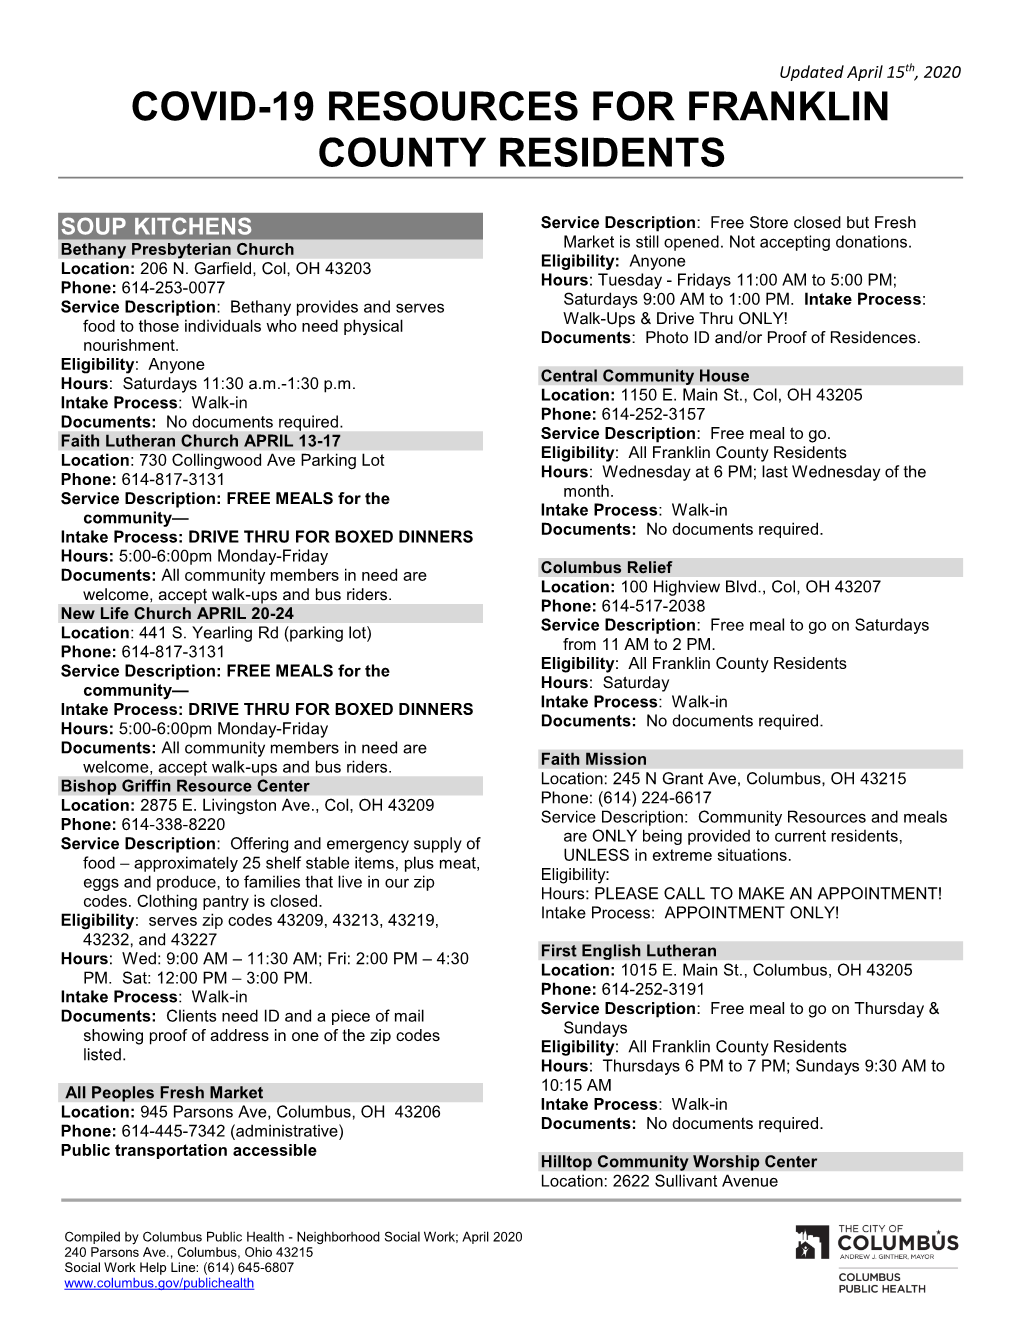 Covid-19 Resources for Franklin County Residents